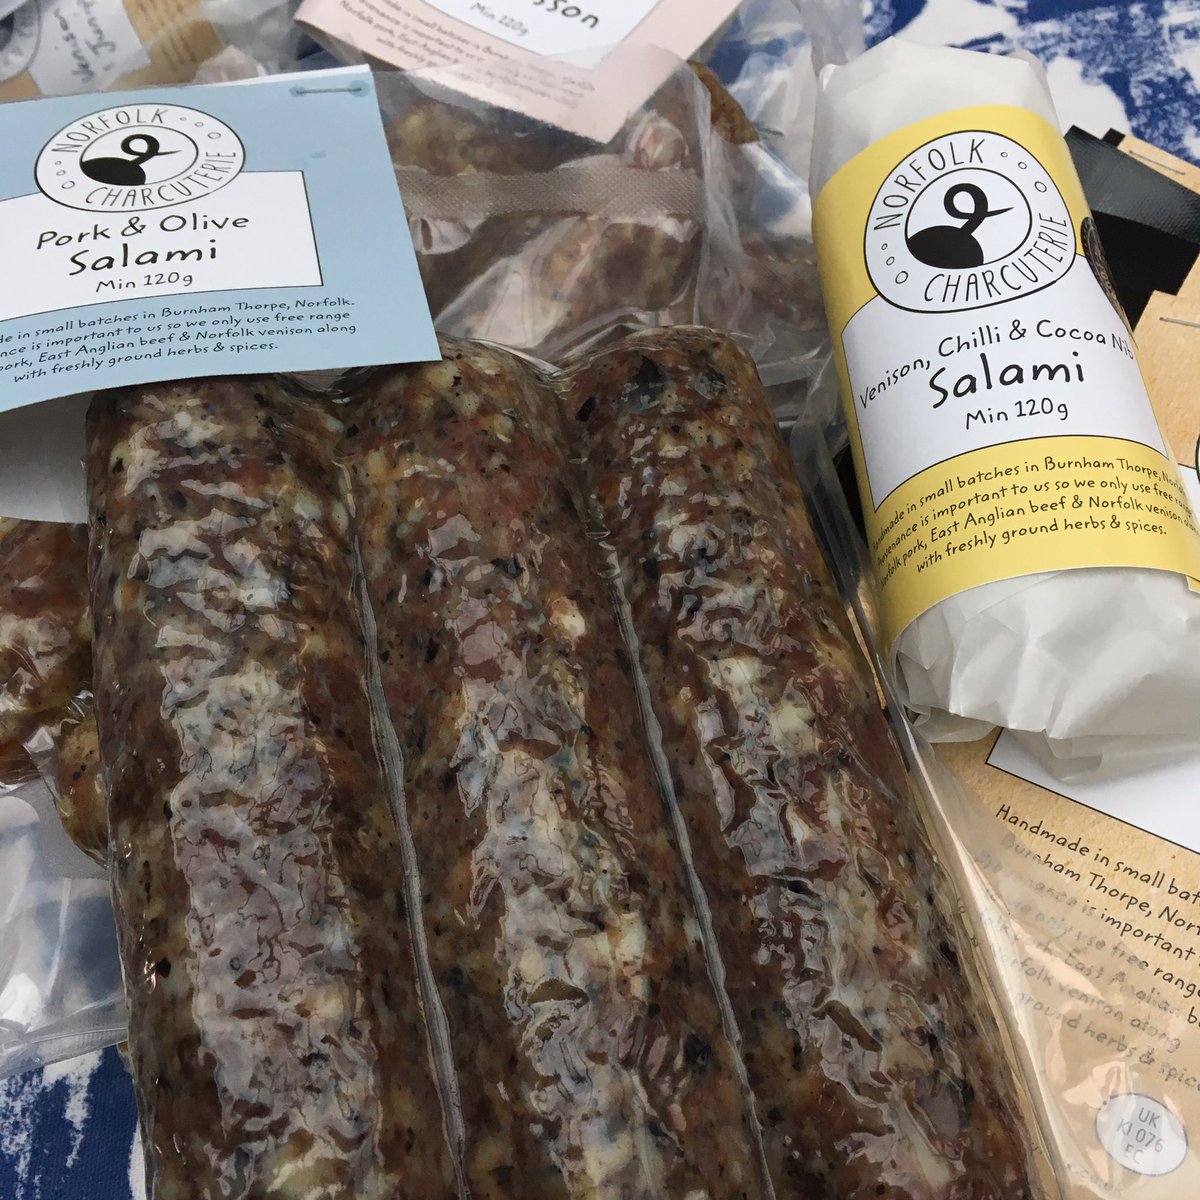 An order all ready to be shipped out to @ParksideFShop with @fruitpigcompany #blackpudding as a travelling companion #smallproducers